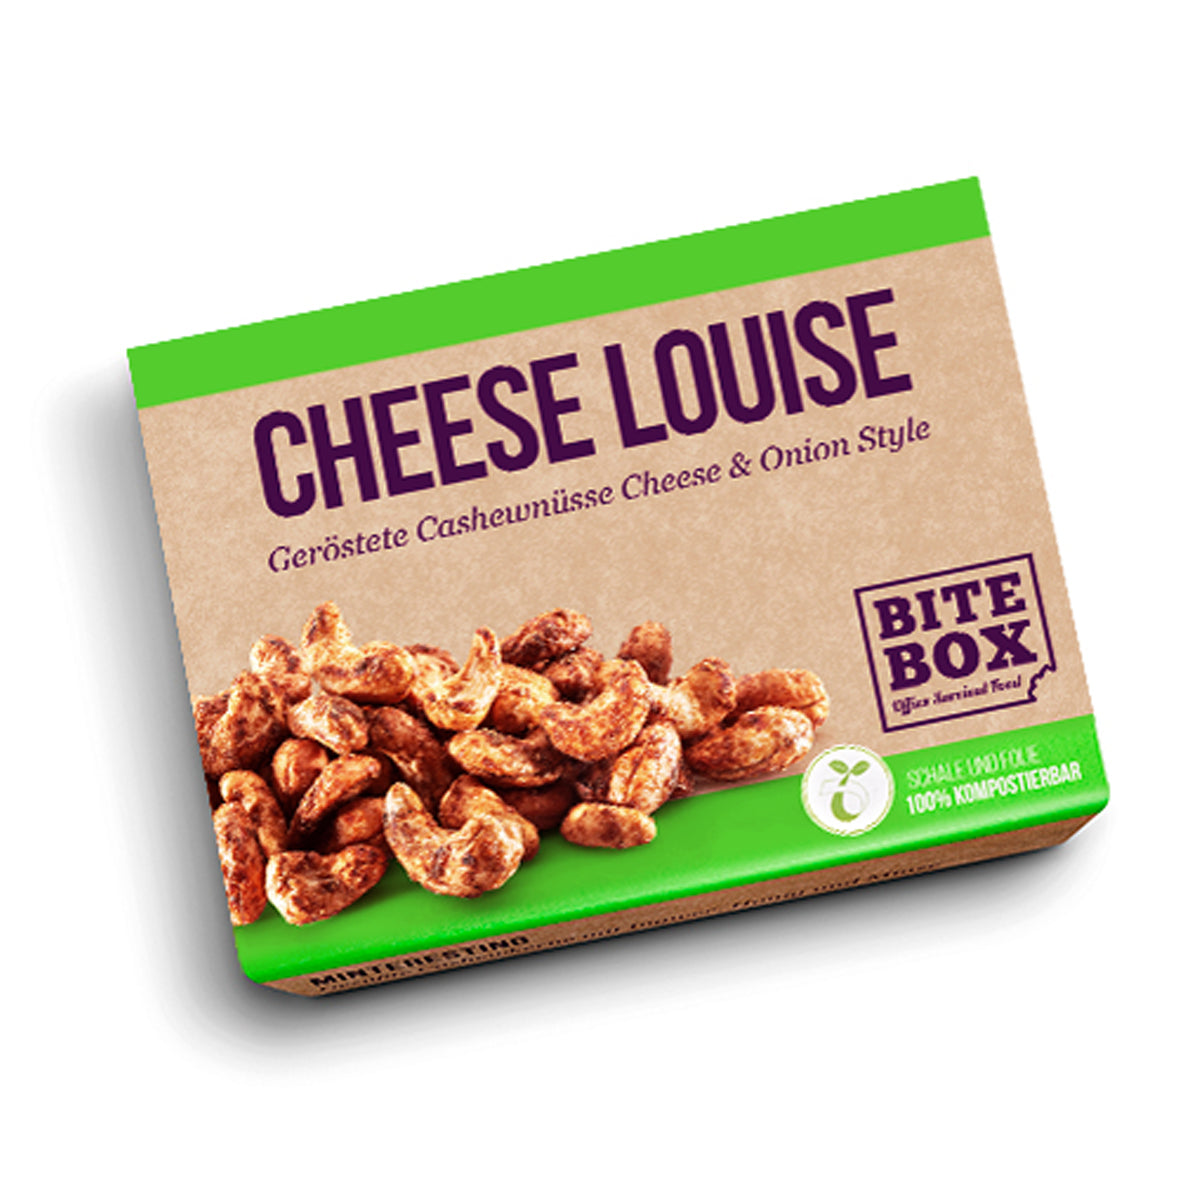 CHEESE LOUISE